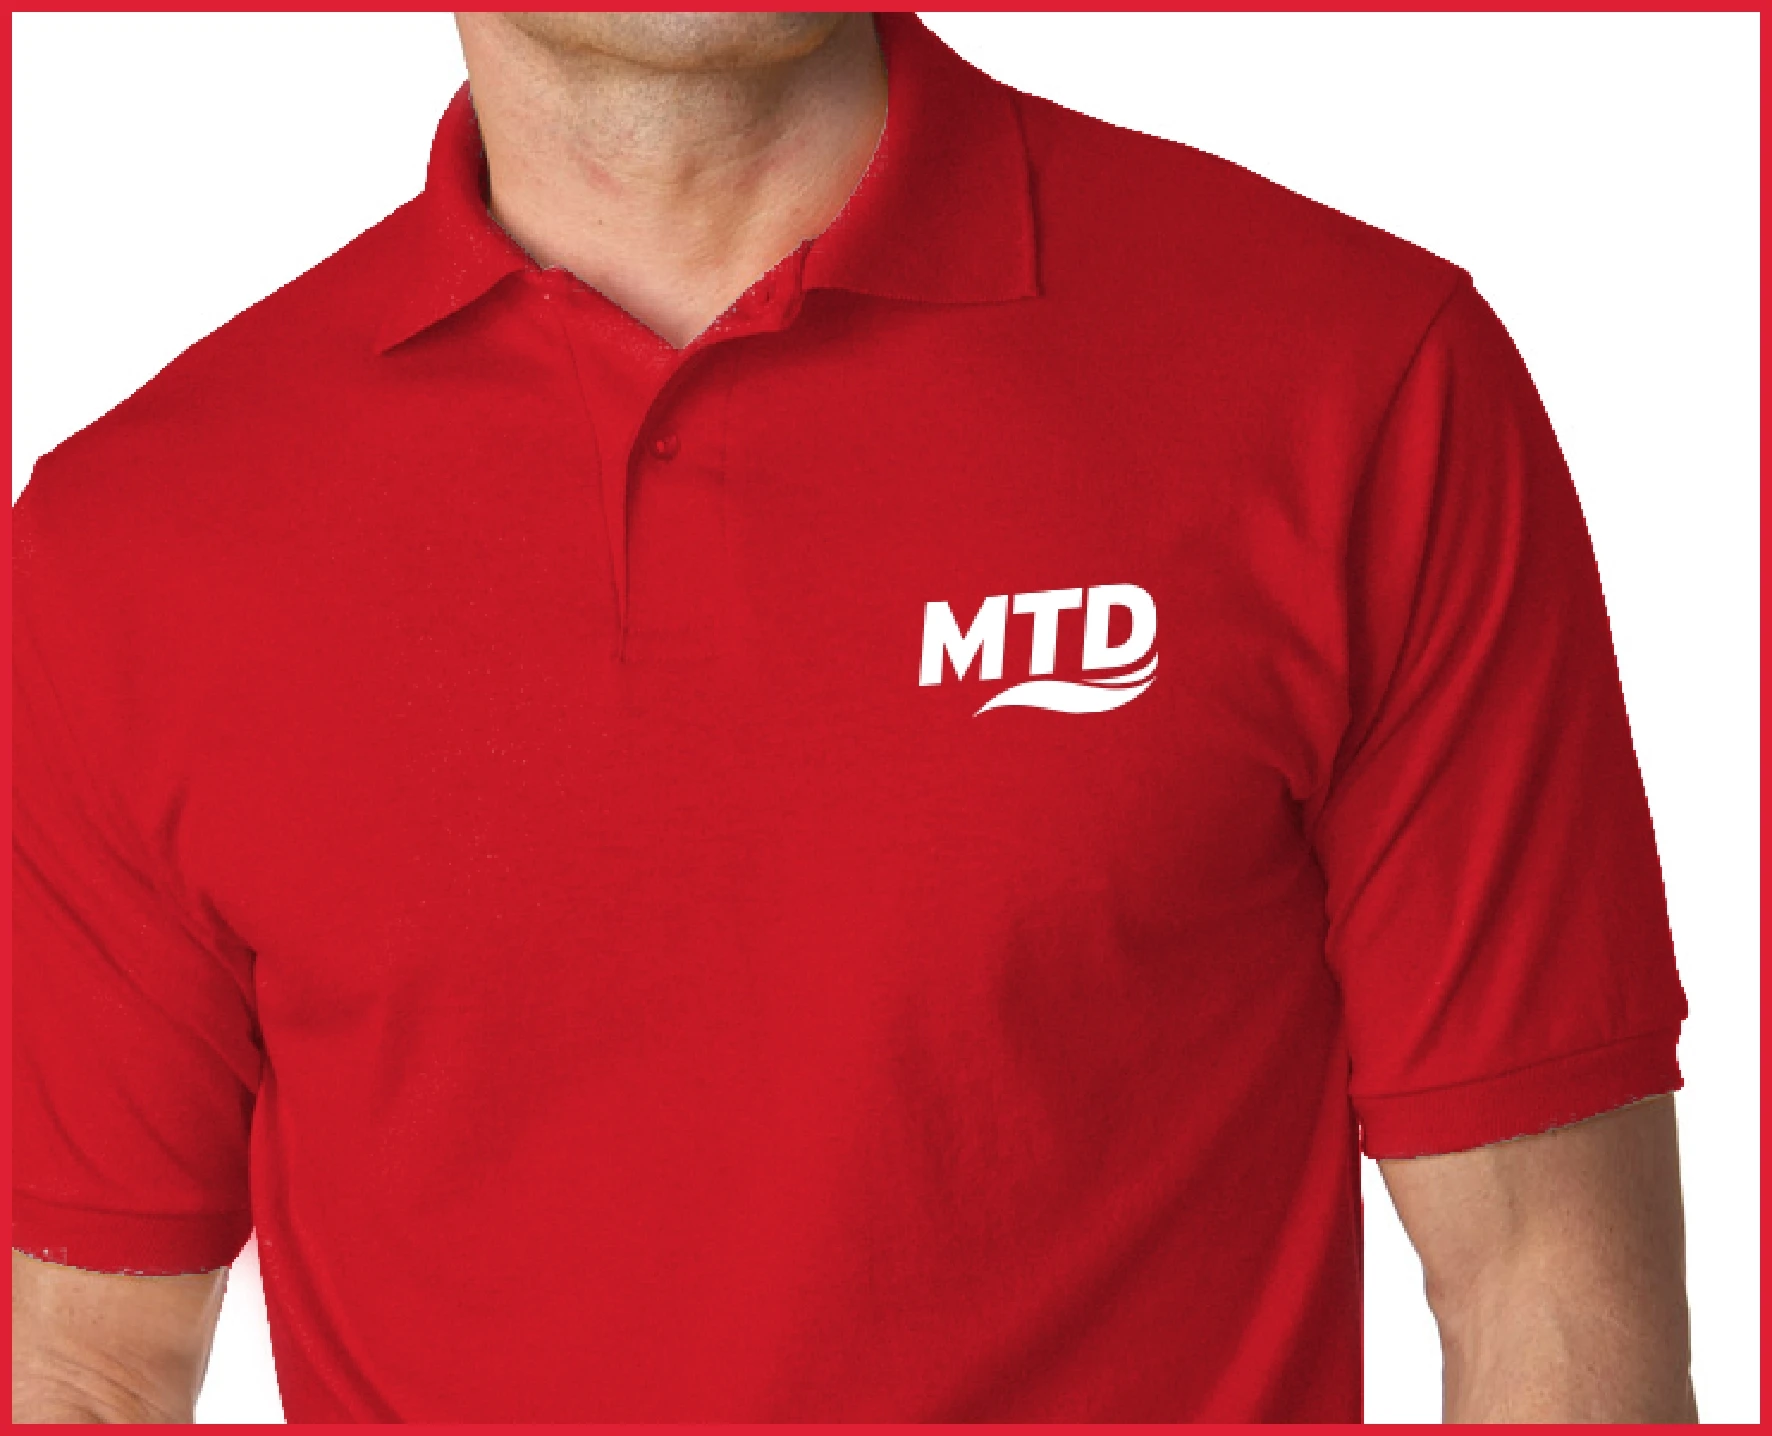 A man wearing a red polo shirt with the word mtd on it.